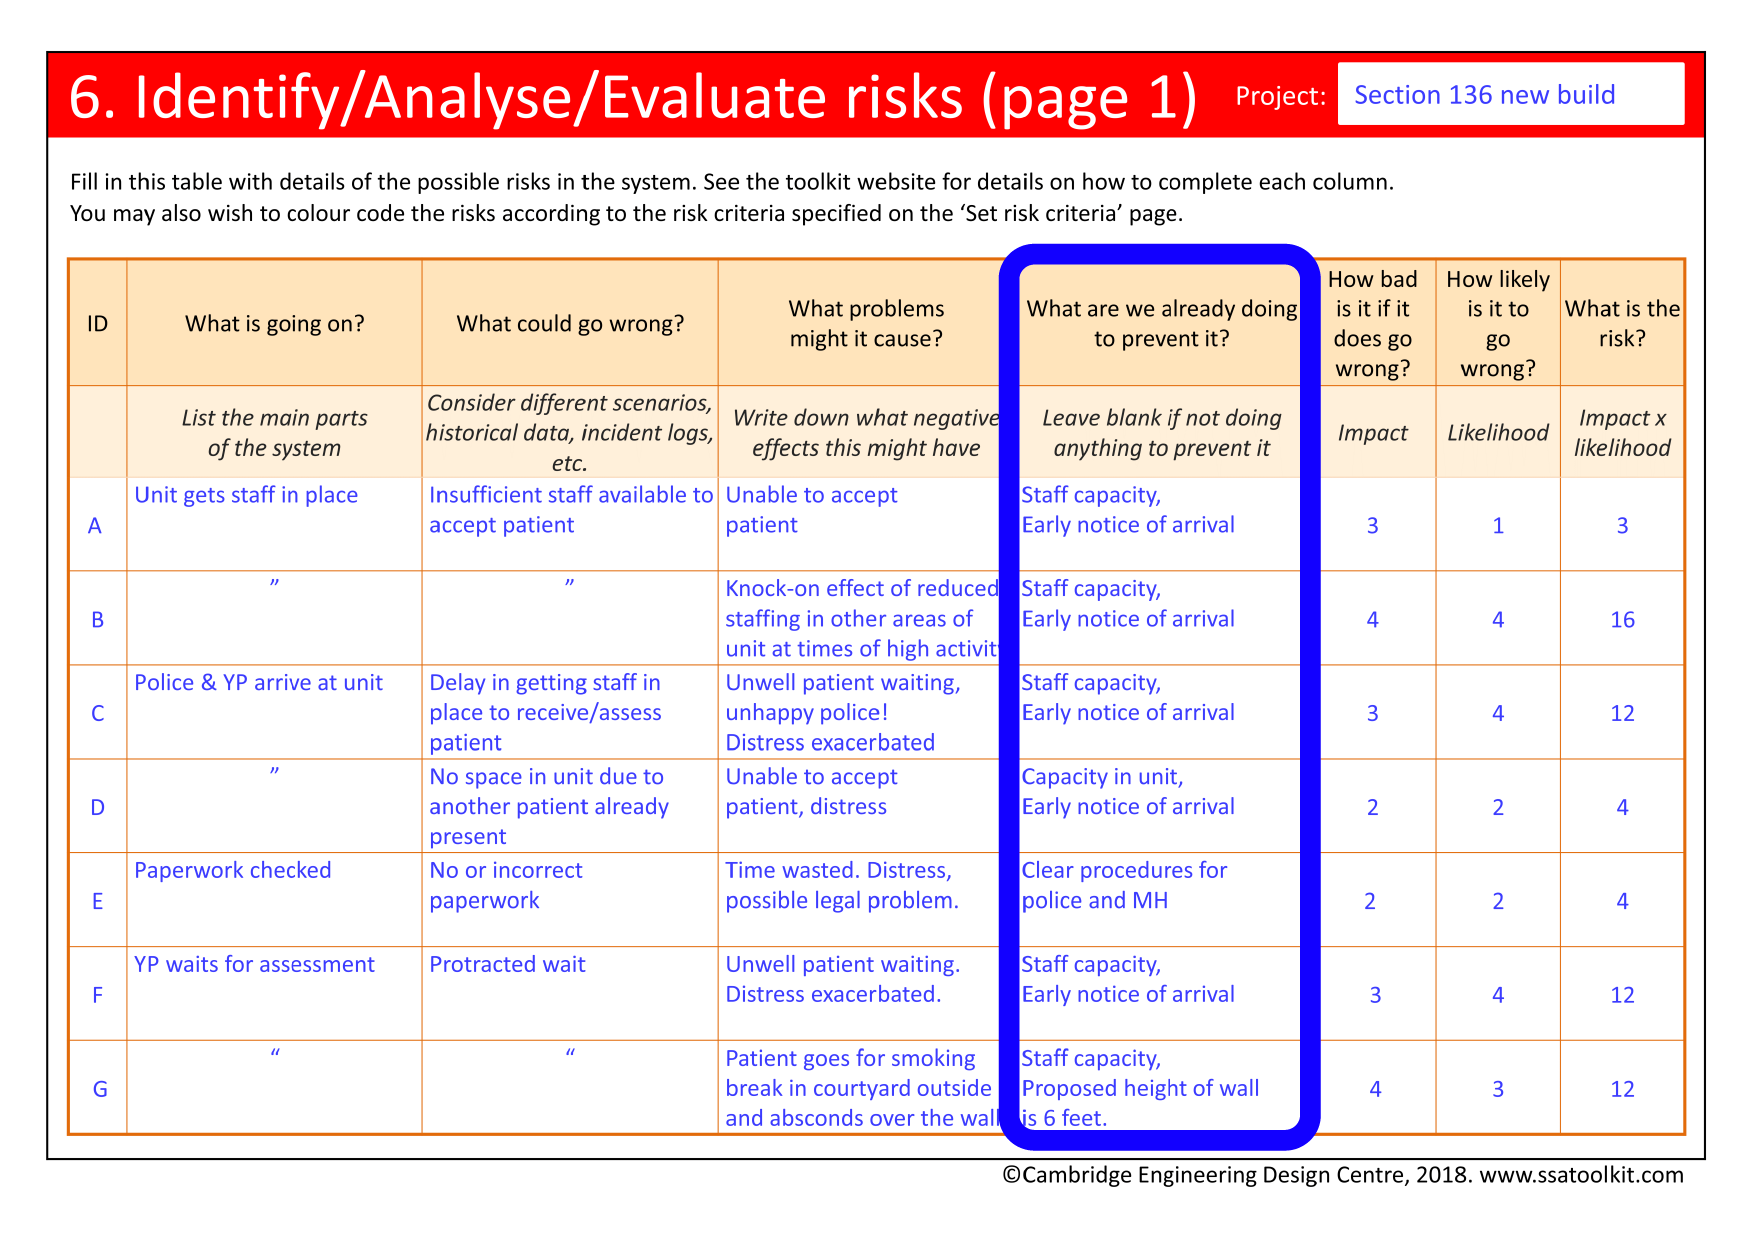 Screenshot of part of the risk table from the Section 136 case study. Column 5 is highlighted. It is entitled: What are we already doing to prevent it?. This column lists measures taken to prevent the issues in earlier columns in the table. For example, measures taken to prevent Insufficient staff being able to accept the patient include Staff capacity and Early notice of arrival. The full form in pdf is available from the Resources page.